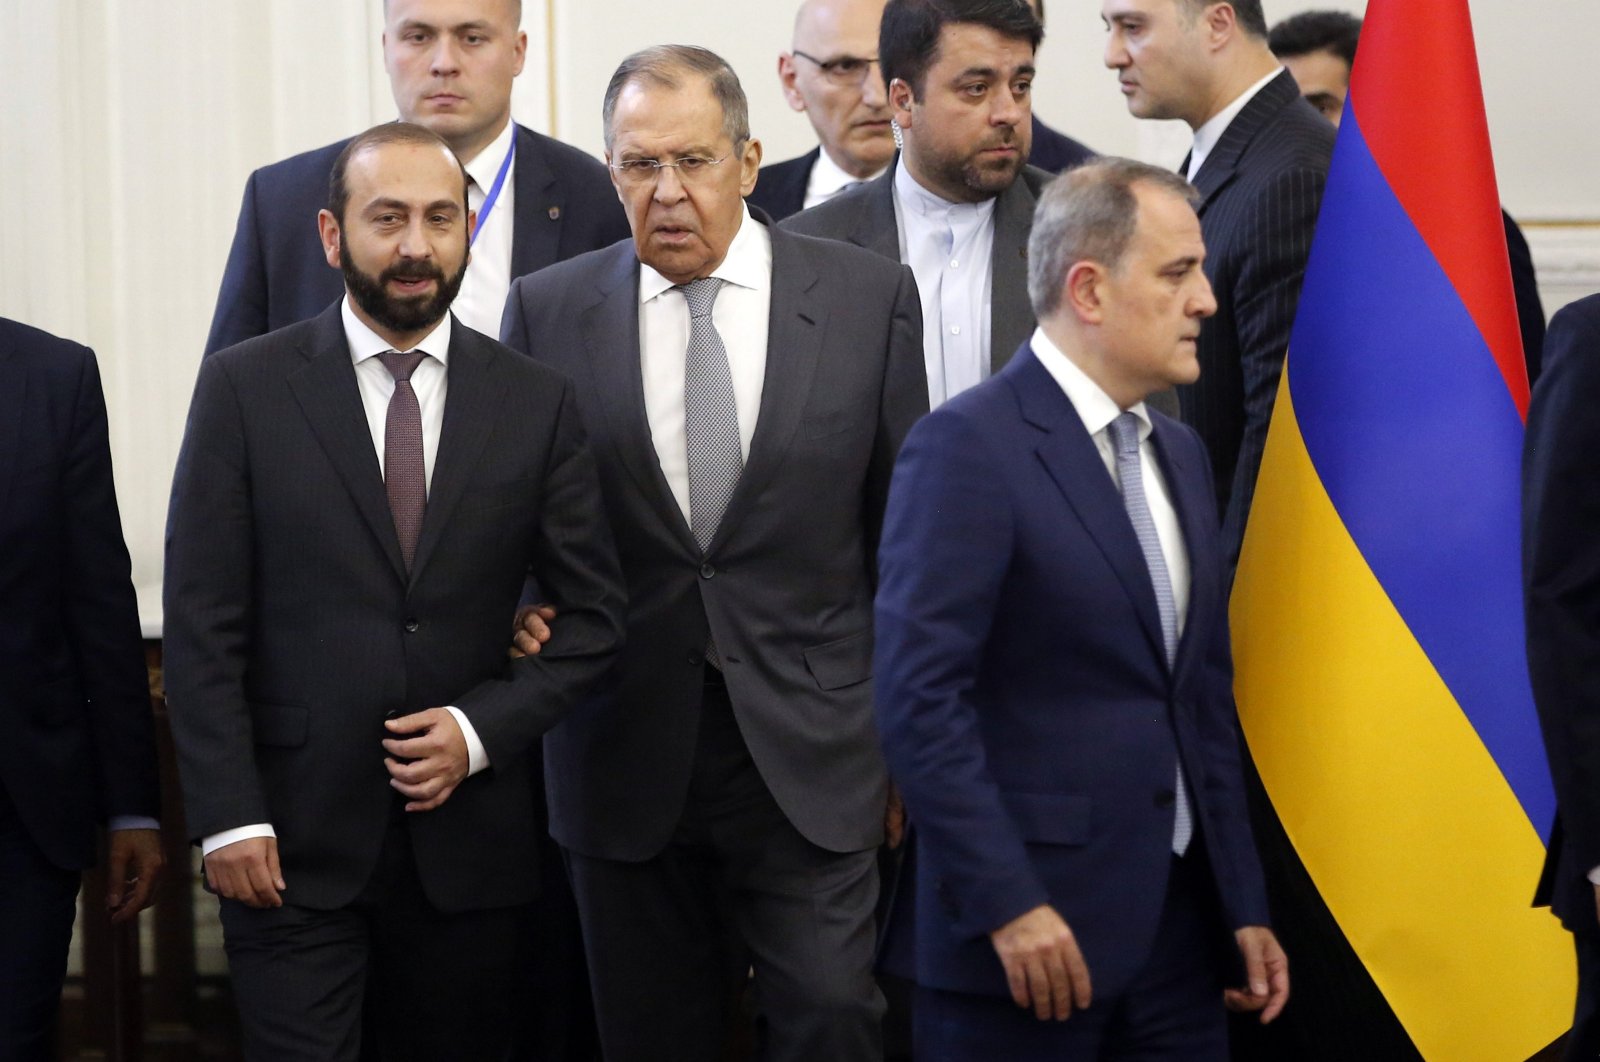 Russian Foreign Minister Sergey Lavrov (C), Armenian Foreign Minister Ararat Mirsojan (L) and Azerbaijani Foreign Minister Jeyhun Bayramov (R) arrive at a meeting, in Tehran, Iran, Oct. 23, 2023. (EPA Photo)